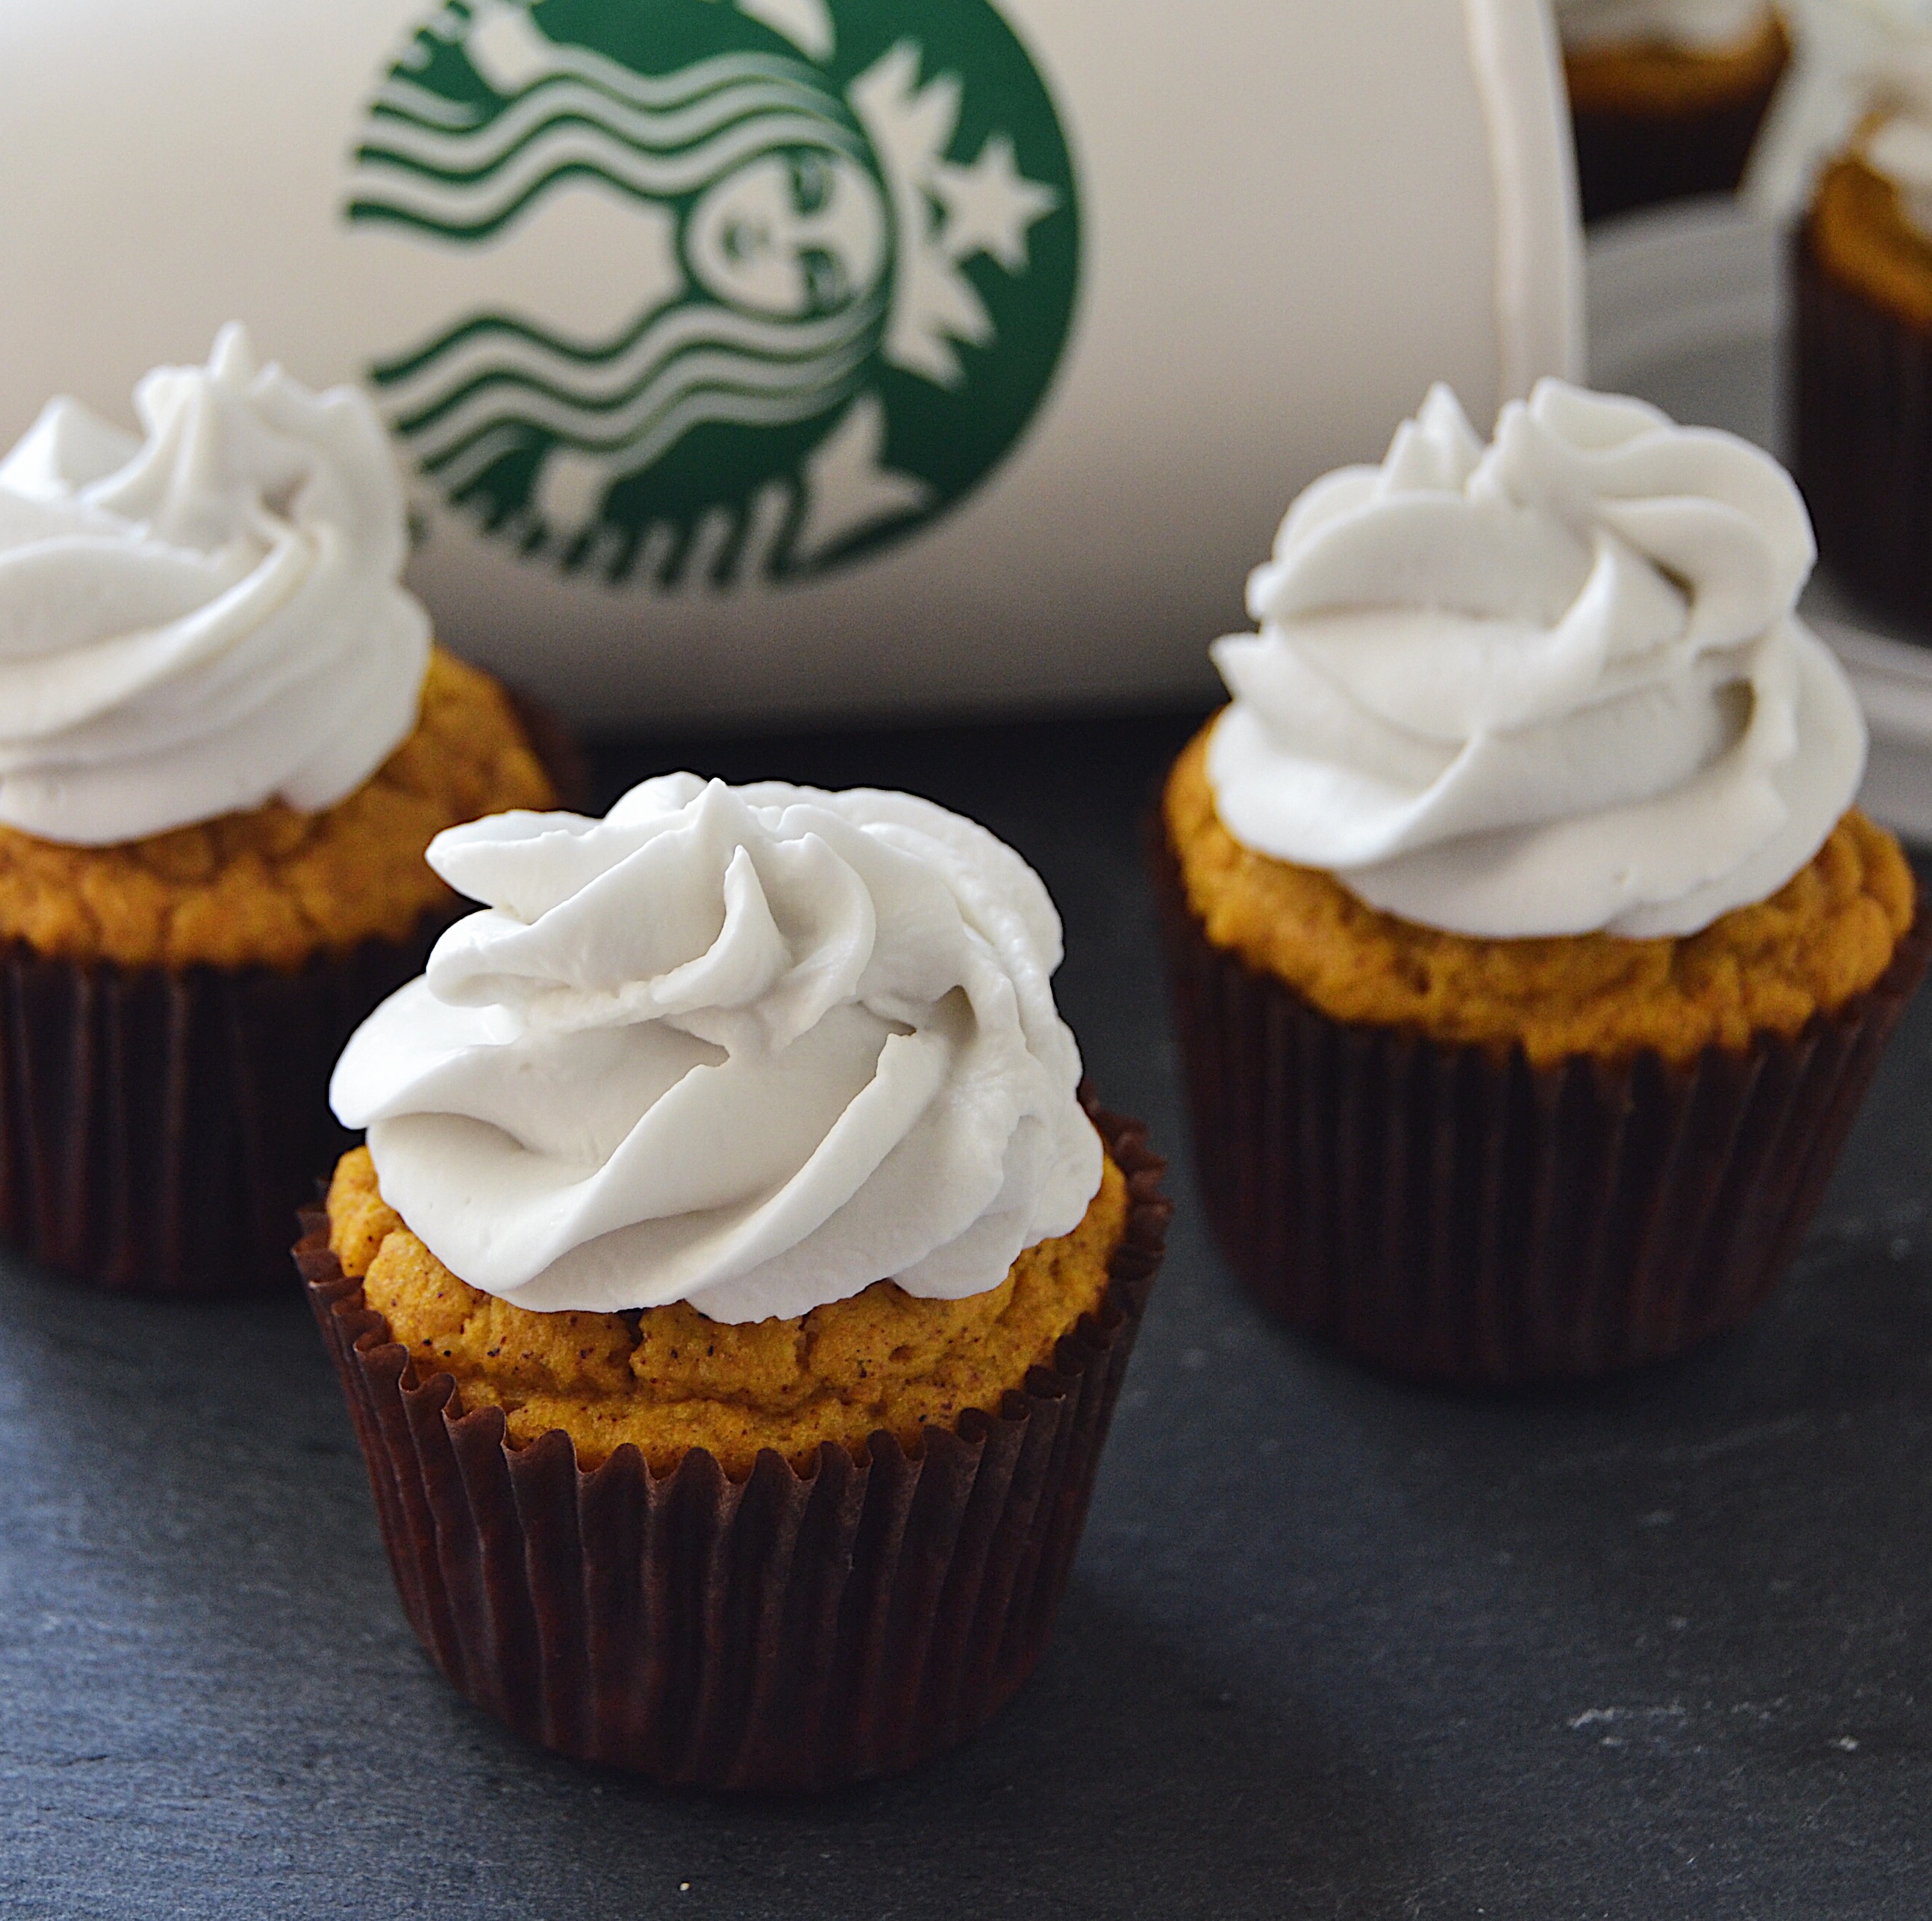 Starbucks Inspired pumpkin dog treat recipe for the dog you love to spoil